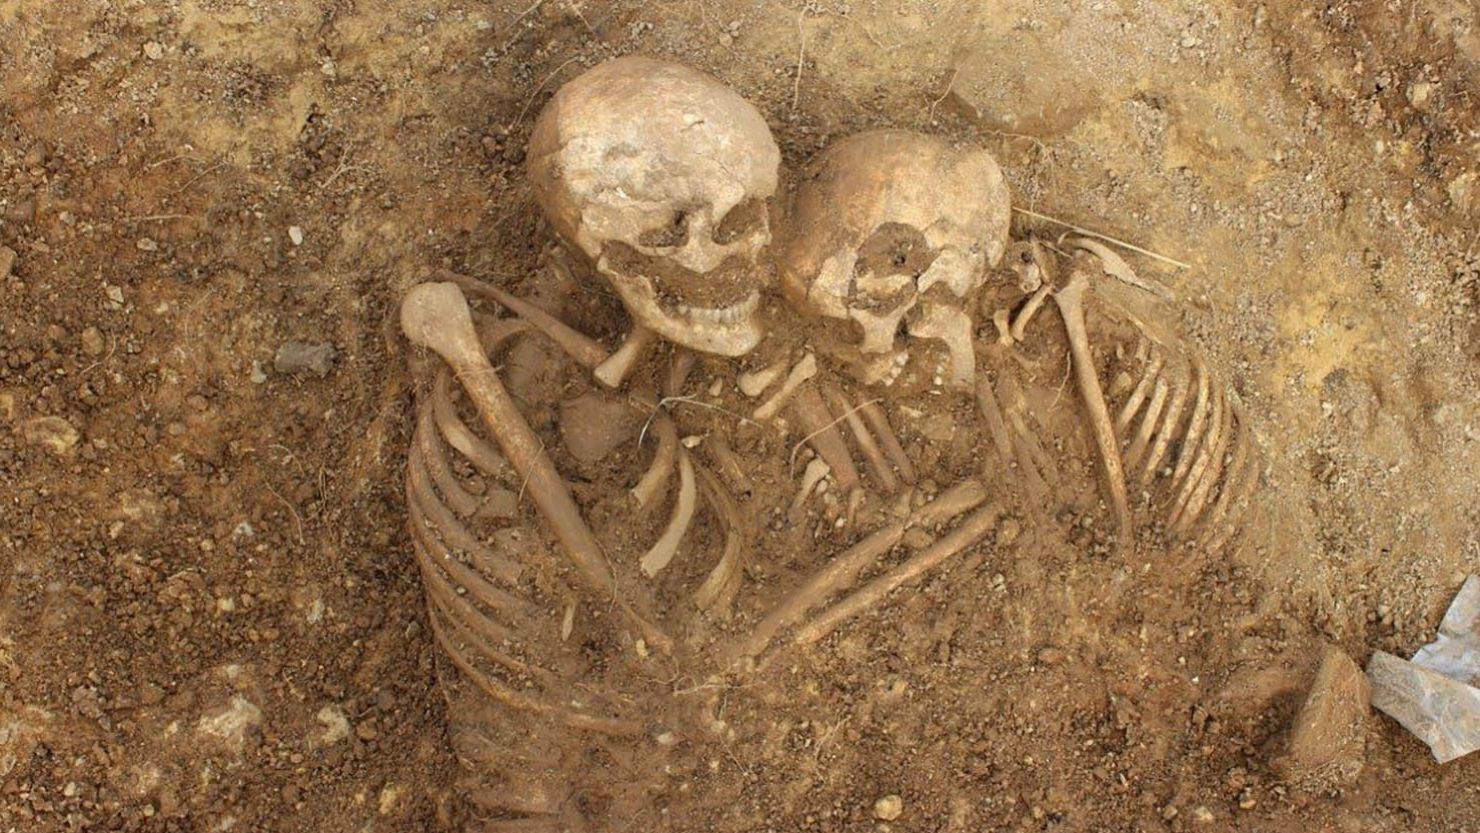 These two skeletons buried together were among the 62 discovered in the previously unknown cemetery. 